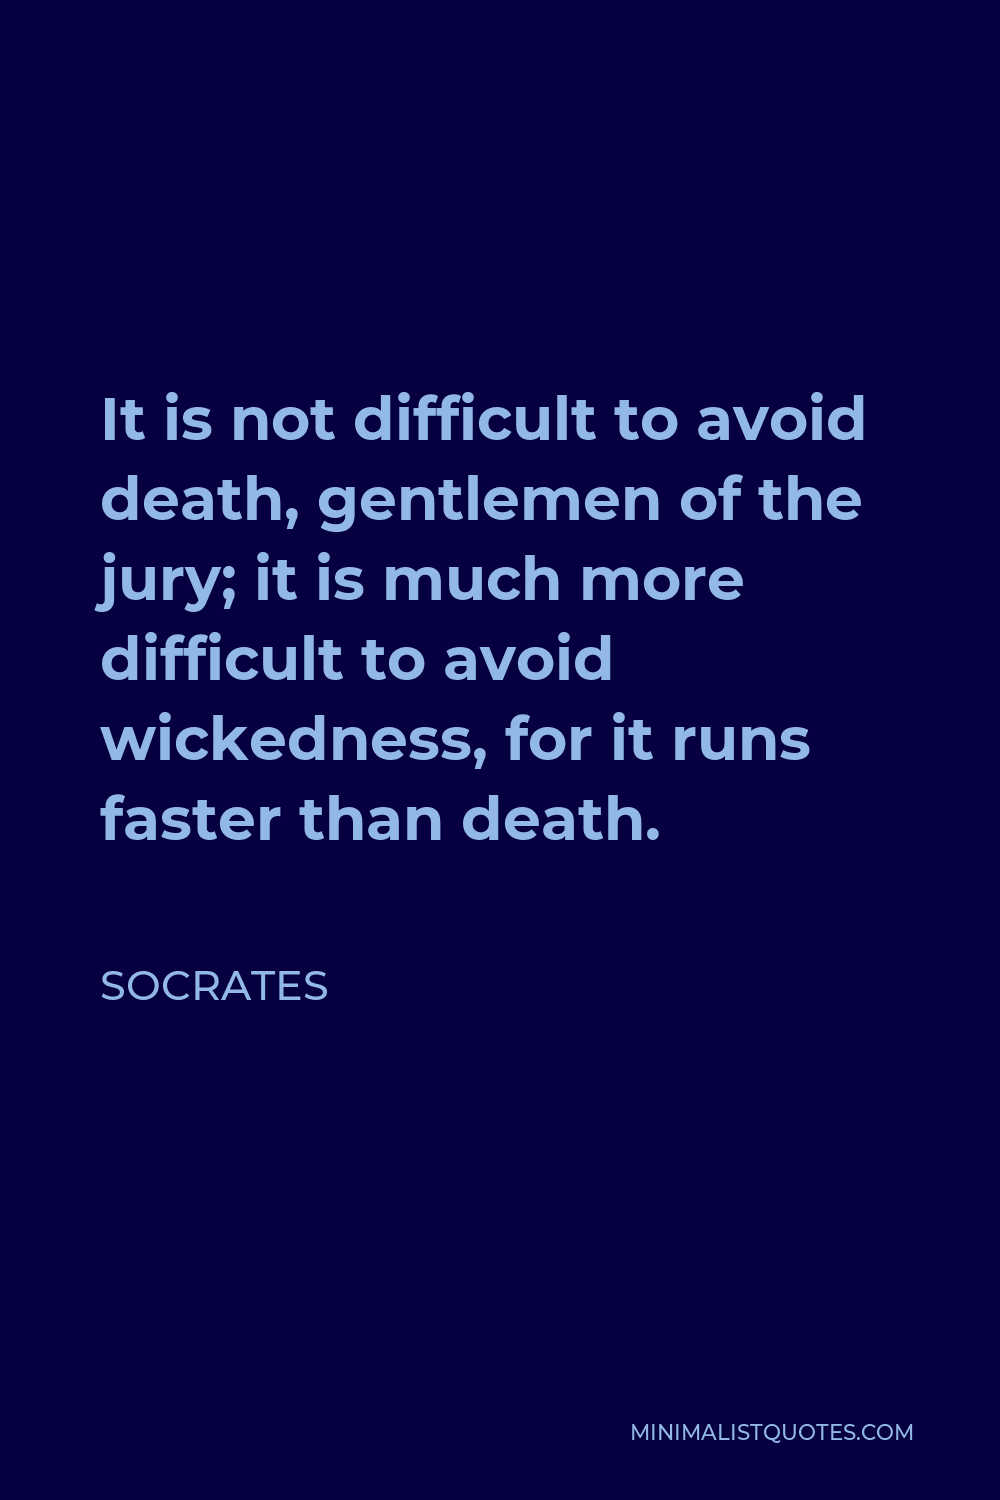 Socrates Quote - It is not difficult to avoid death, gentlemen of the jury; it is much more difficult to avoid wickedness, for it runs faster than death.